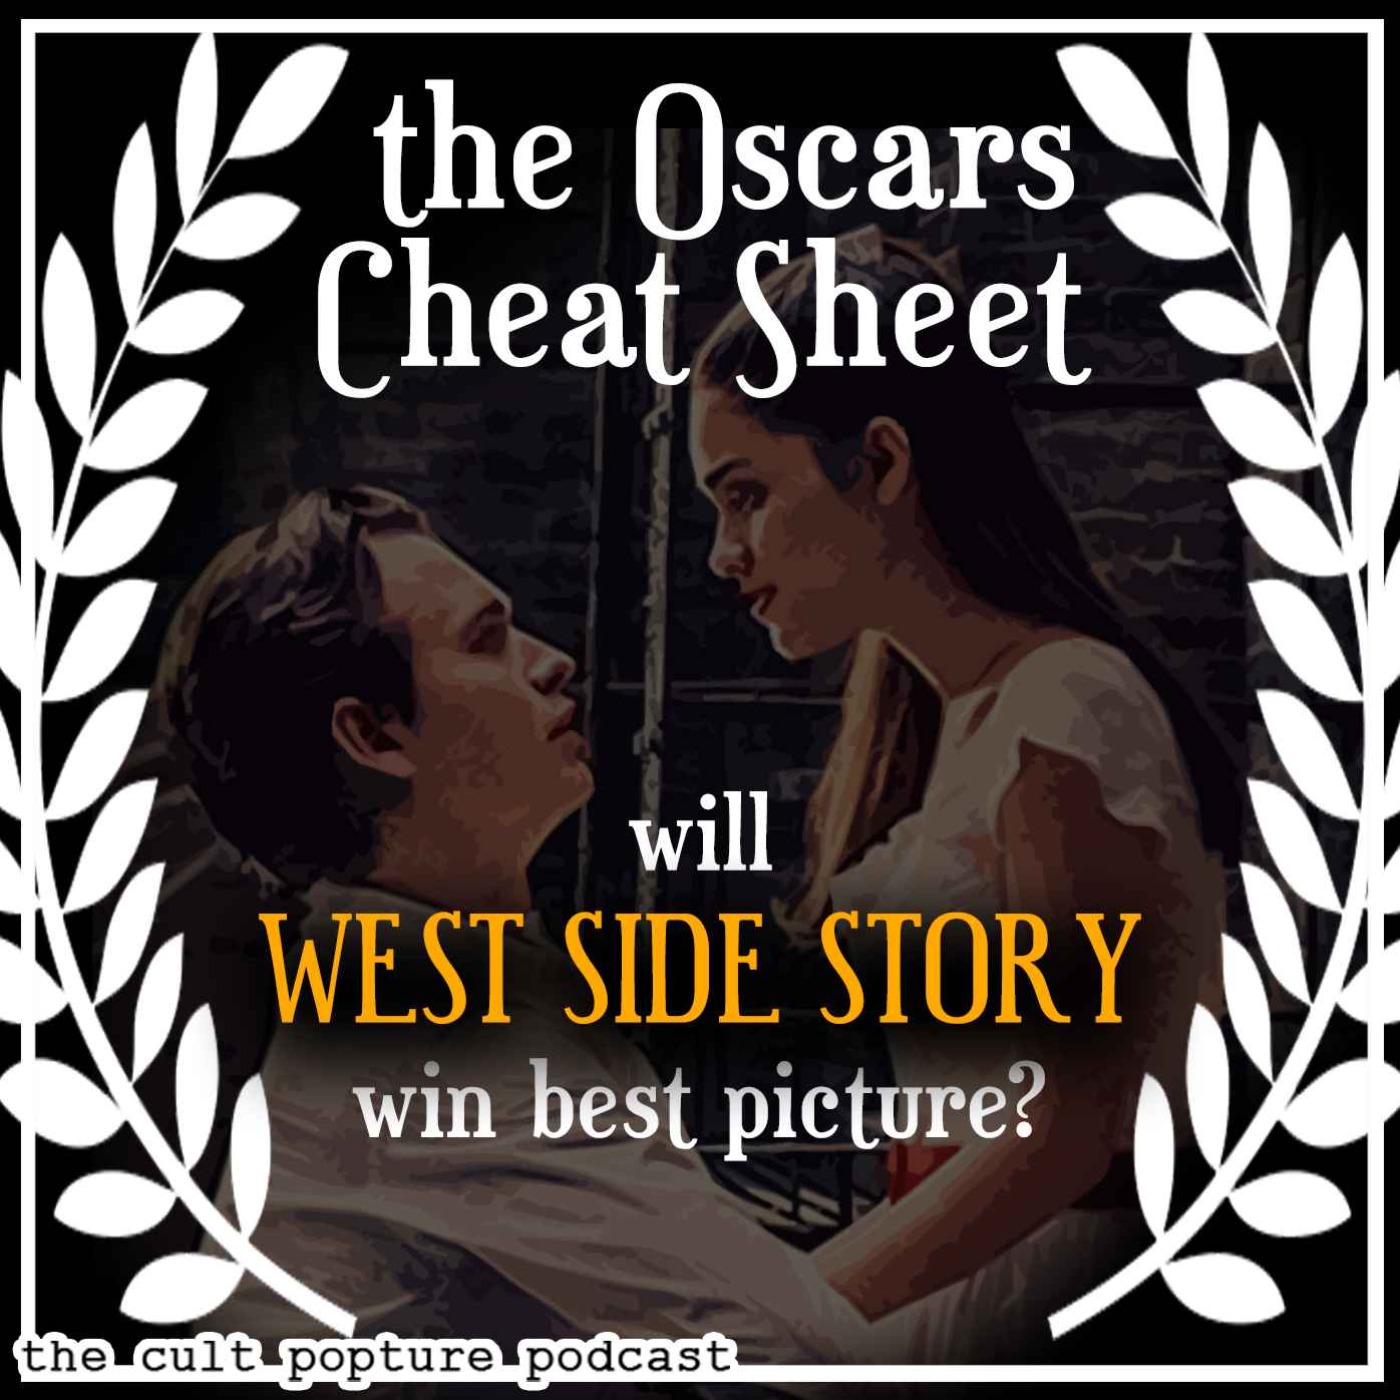 cover art for Will WEST SIDE STORY Win Best Picture? | The Oscars Cheat Sheet